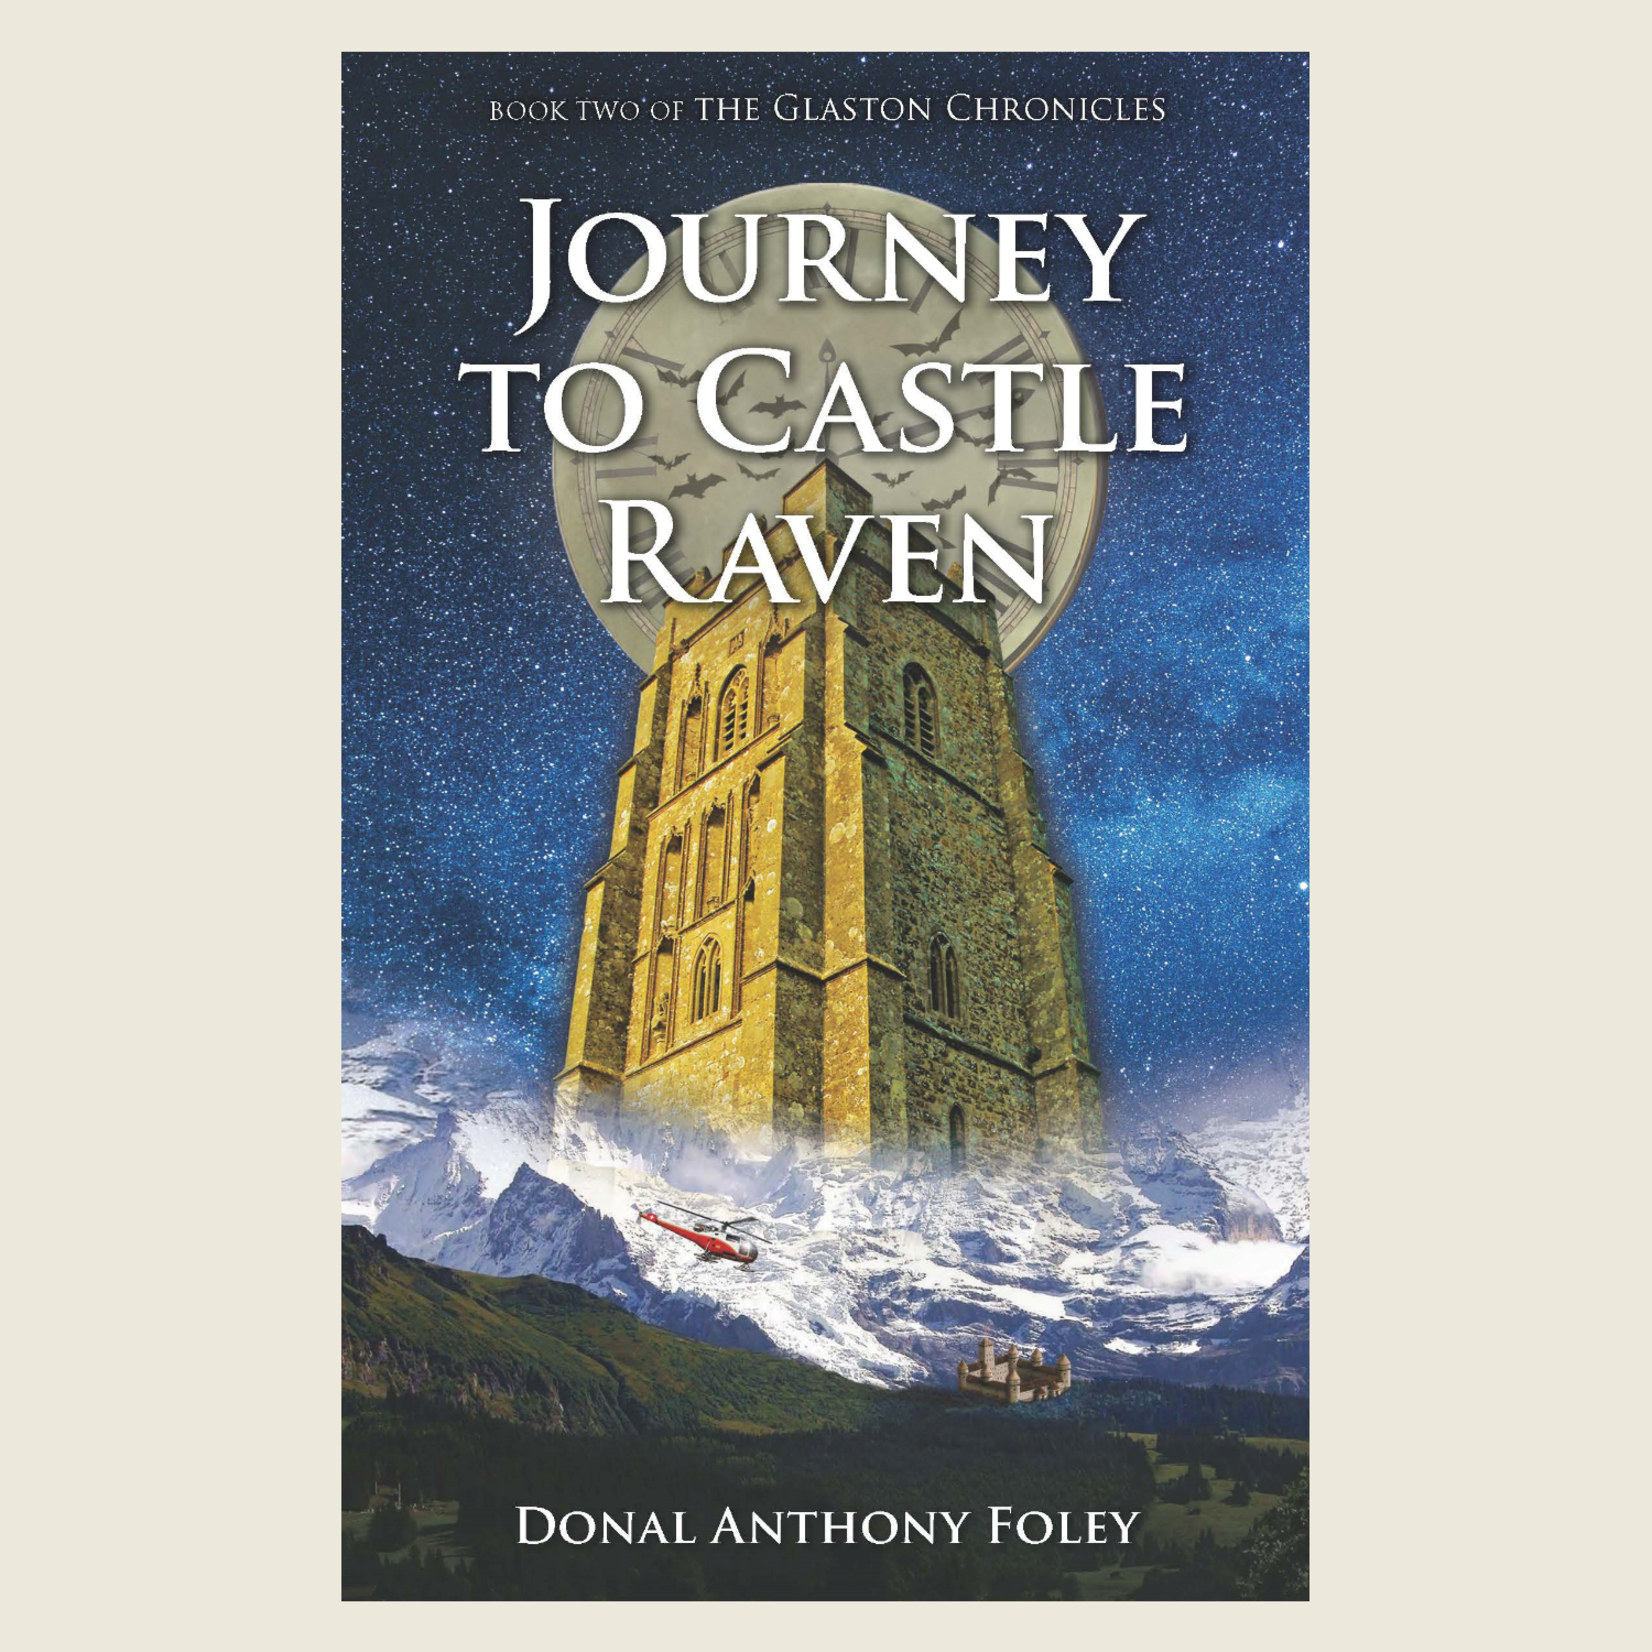 JCR-P - Journey to Castle Raven (Donal Foley; Book 2 of the Glaston Chronicles)